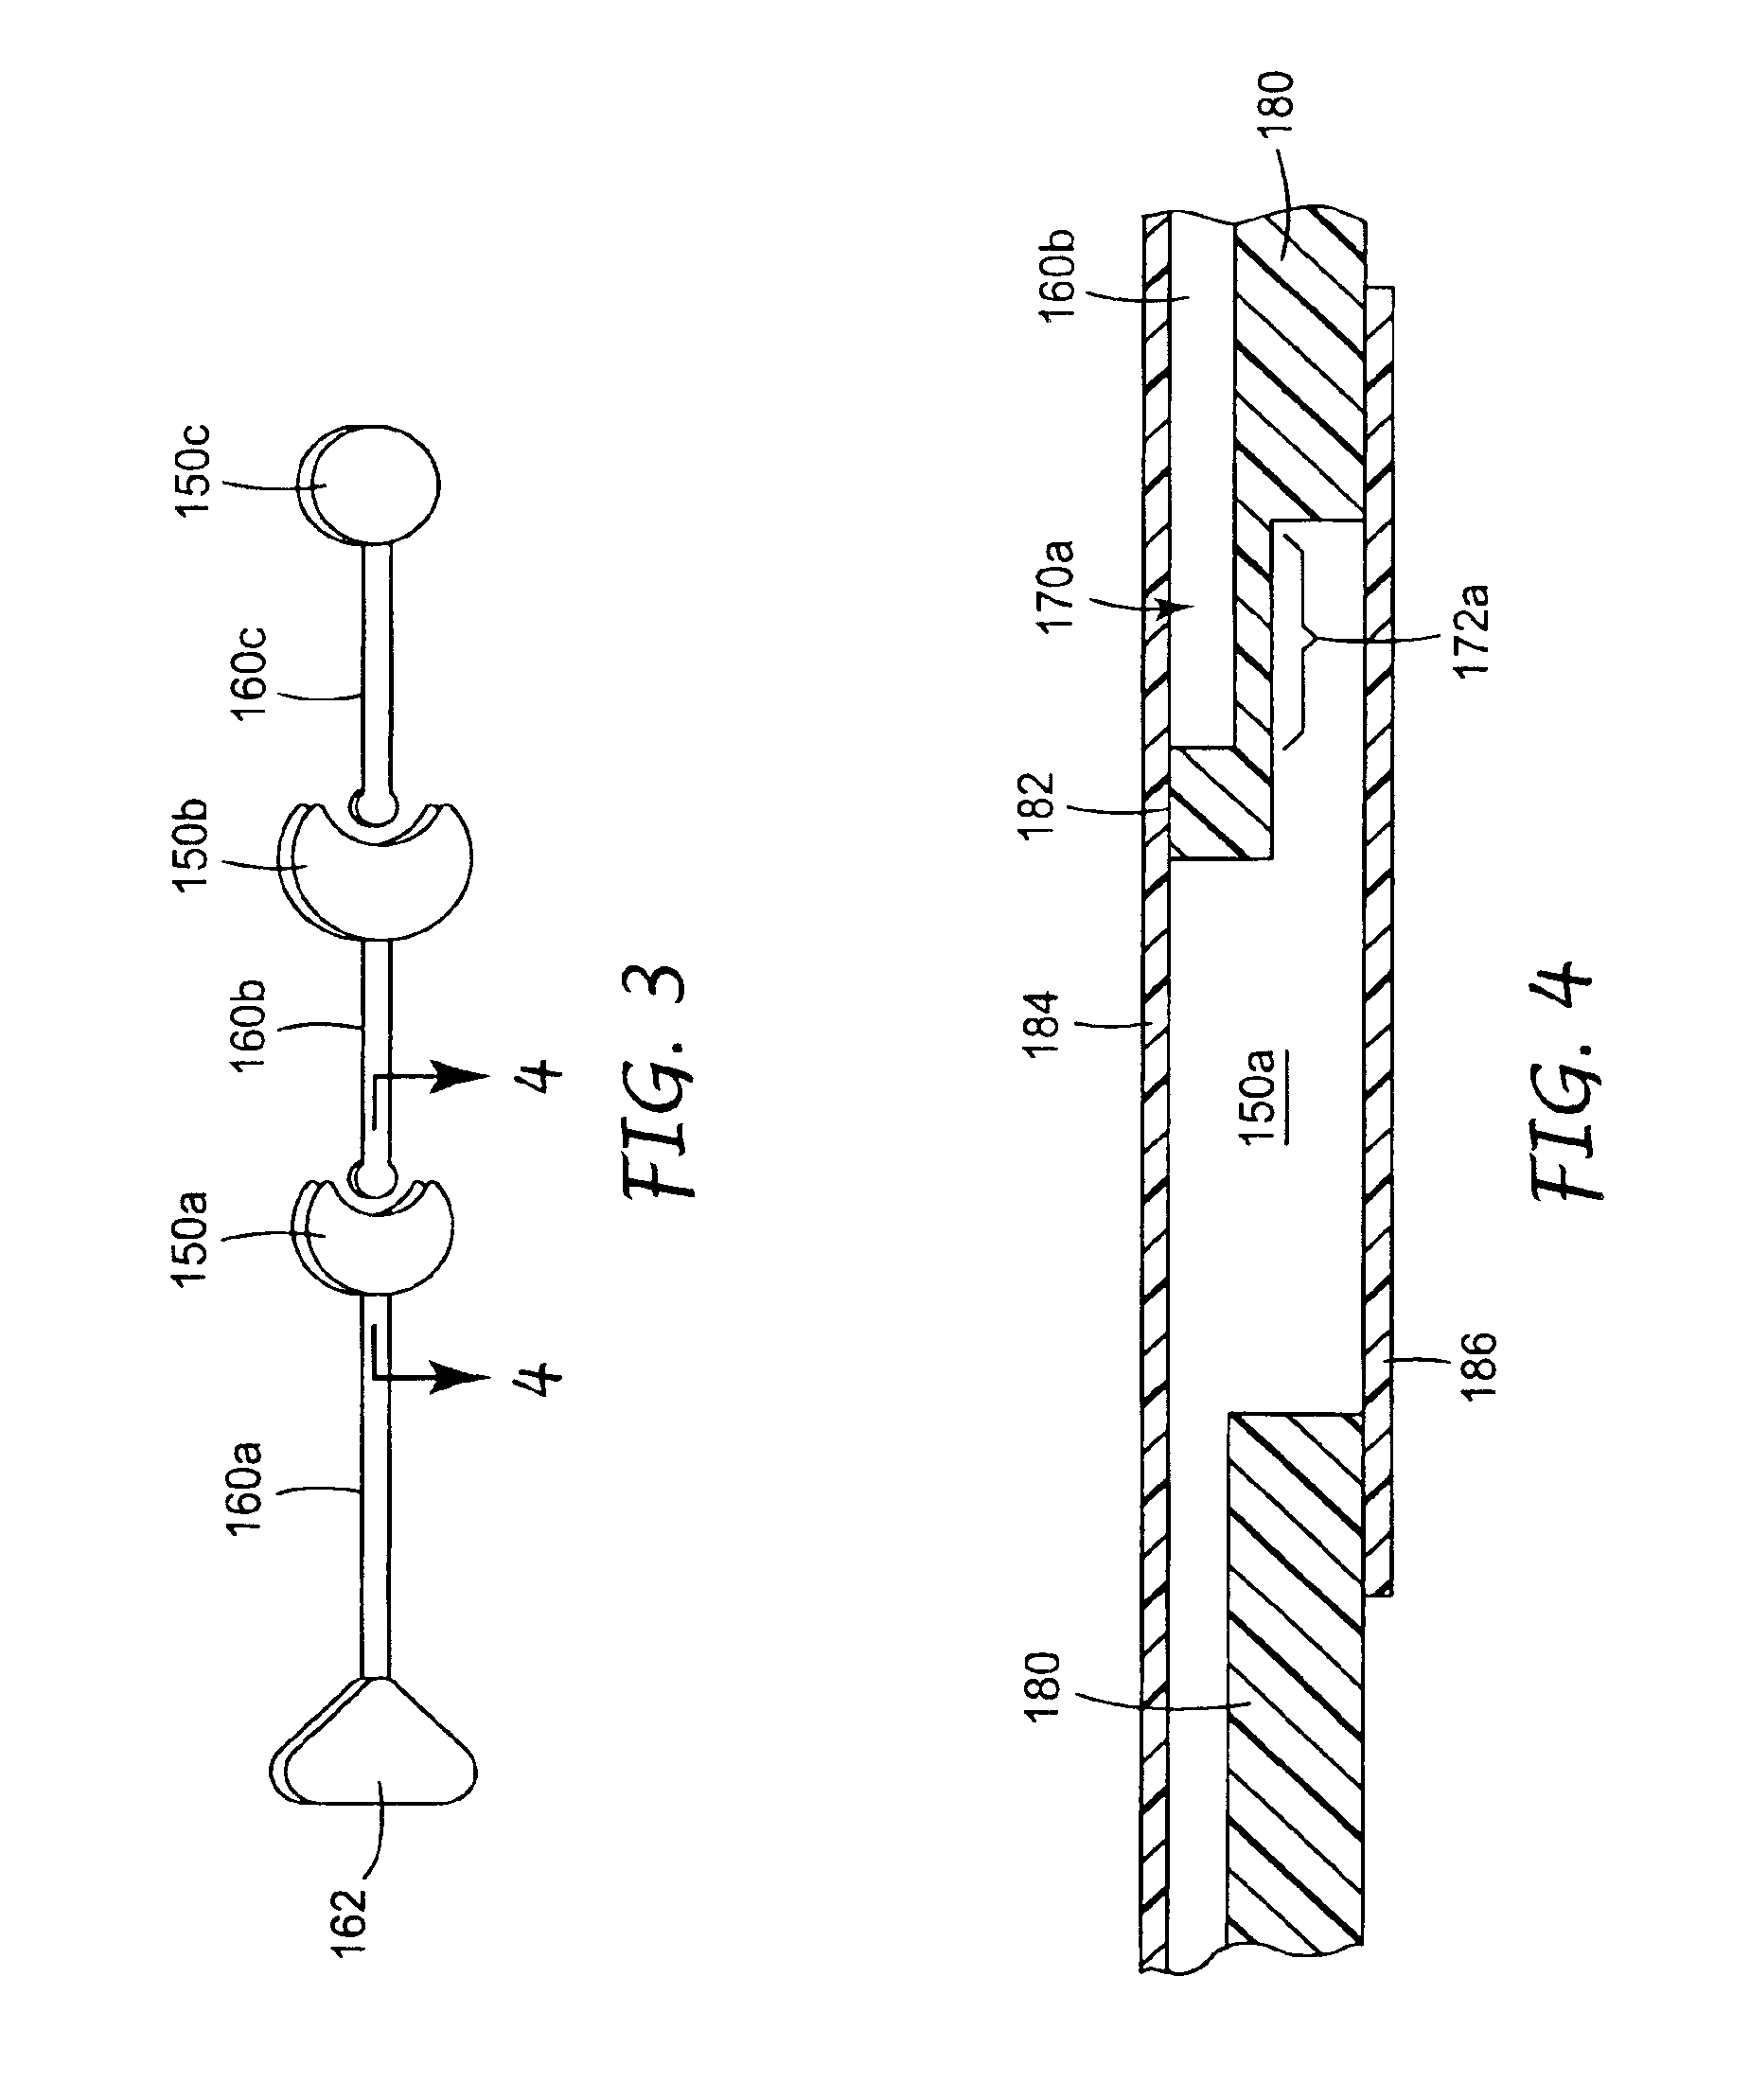 Methods and devices for removal of organic molecules from biological mixtures using anion exchange